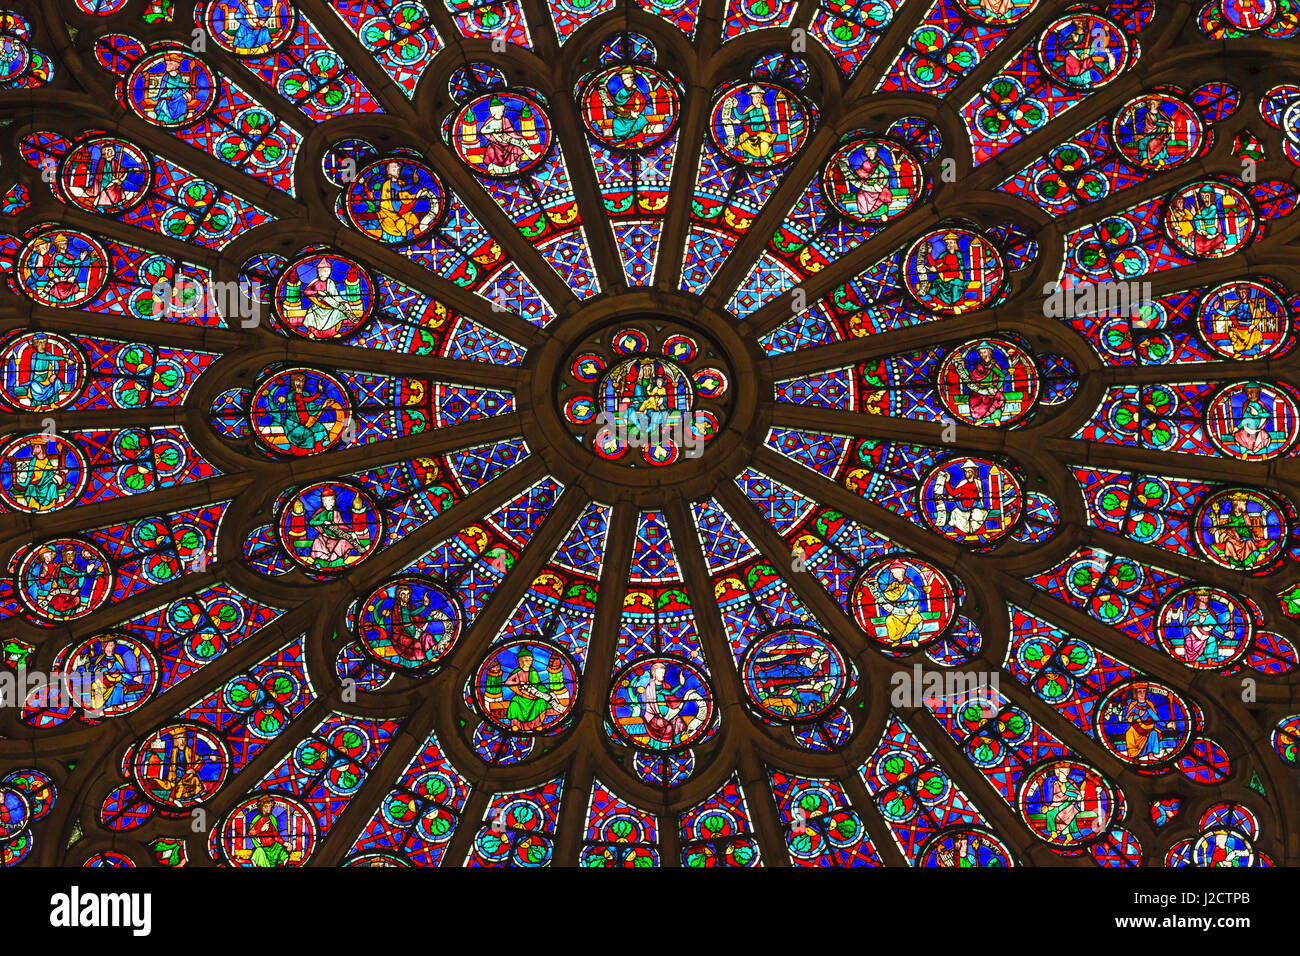 North Rose Window Virgin Mary Jesus Disciples Stained Glass Notre Dame Cathedral Paris, France. Notre Dame was built between 1163 and 1250 AD. Virgin Mary Rose Window oldest in Notre Dame from 1250. Stock Photo